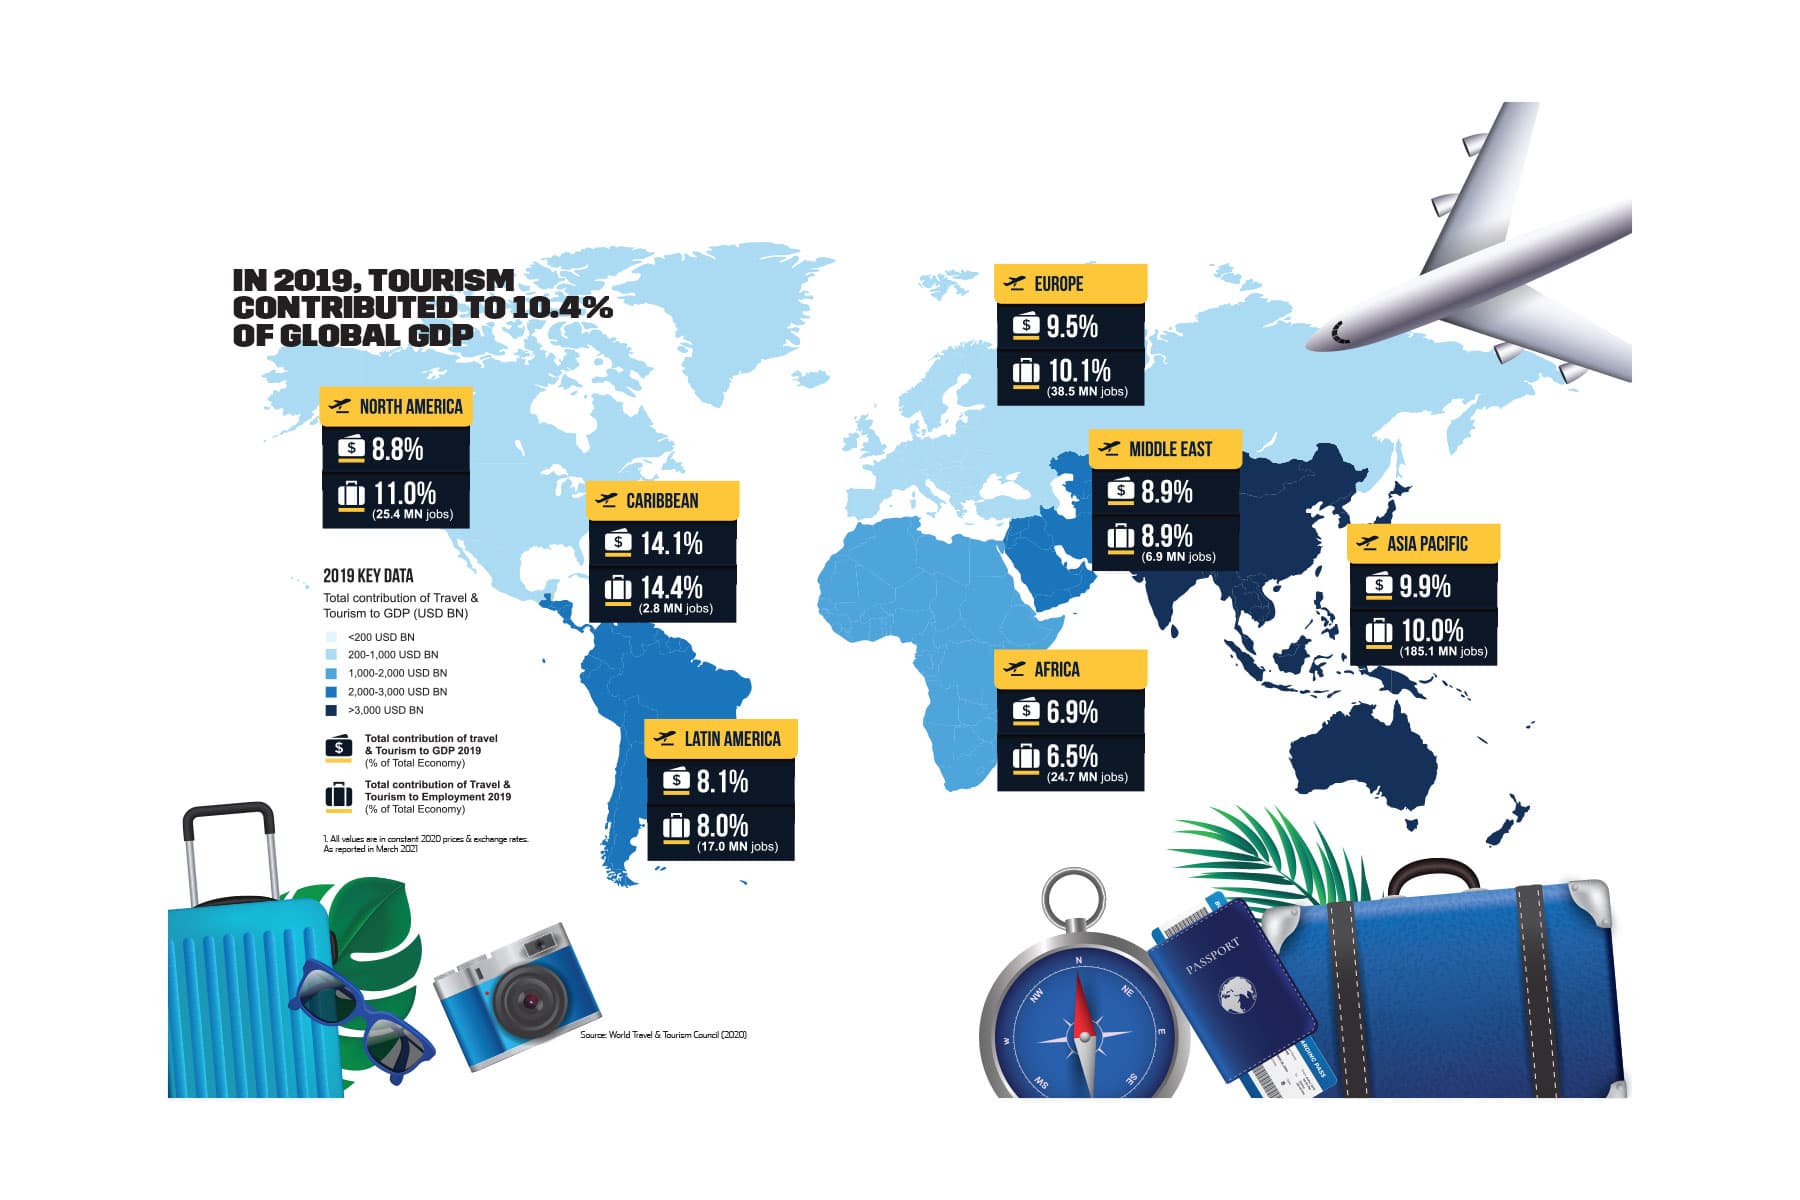 In 2019, Tourism contributed to 10.4% of Global GDP